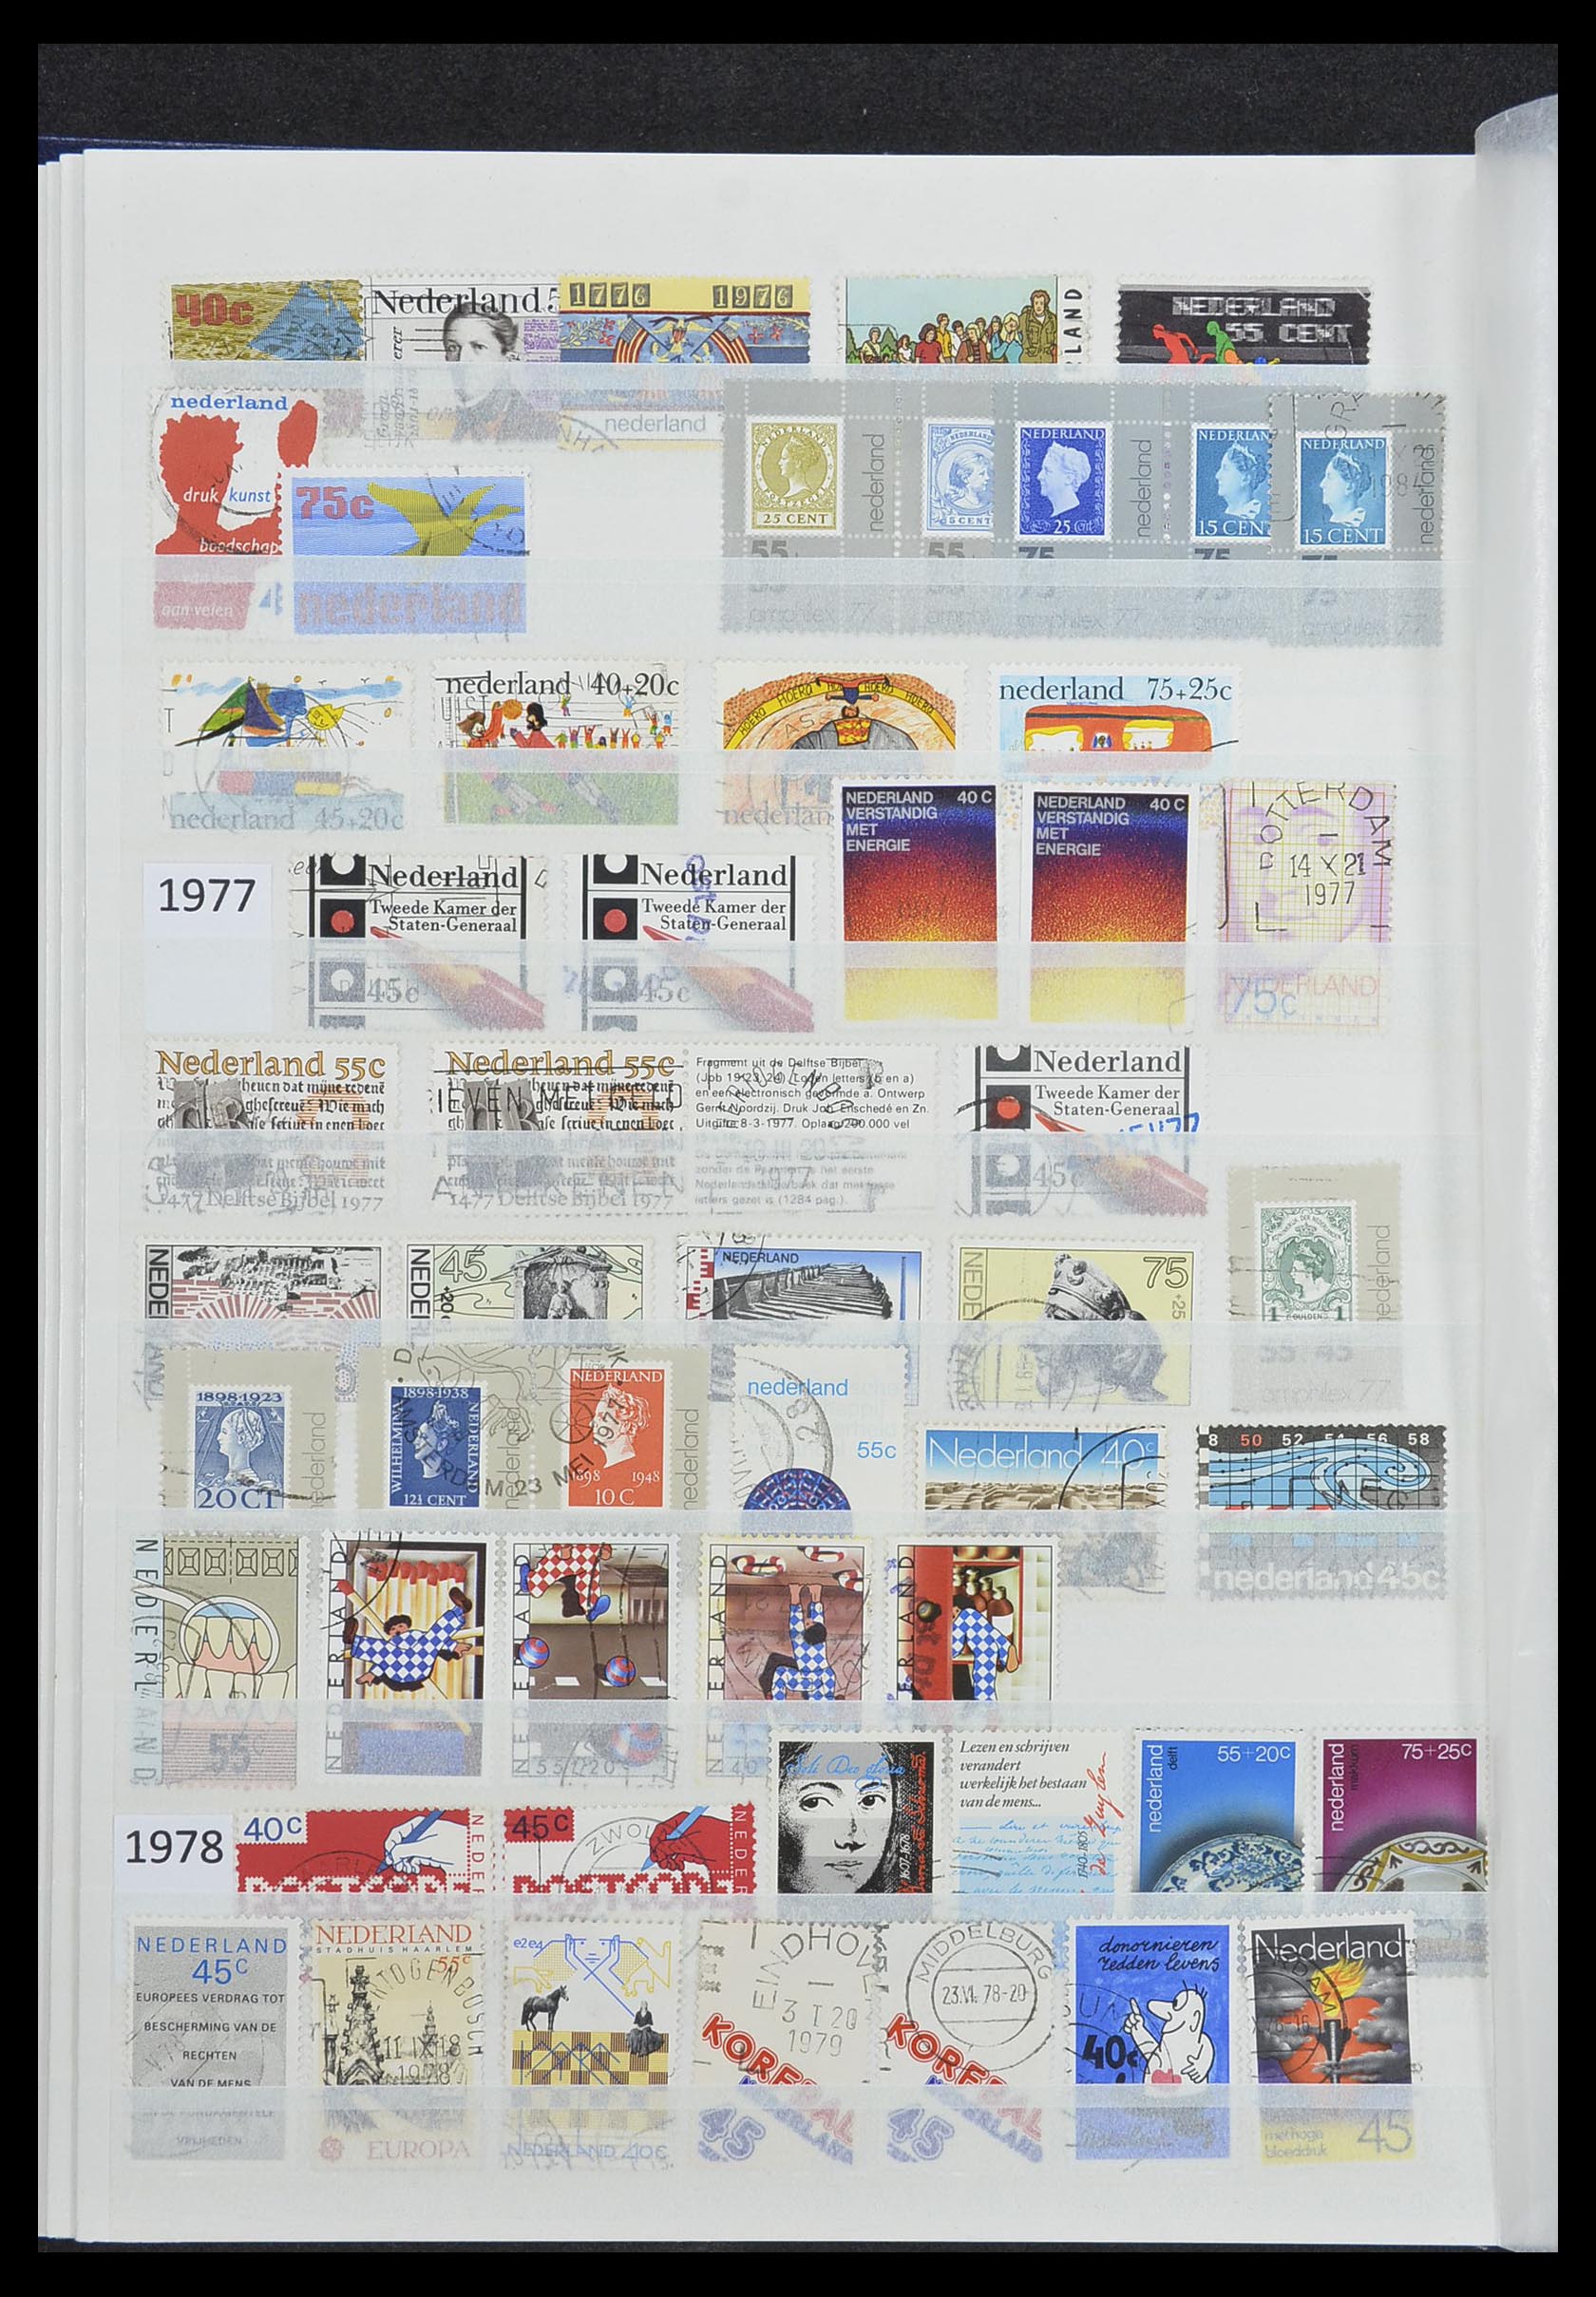 33875 051 - Stamp collection 33875 Europa.